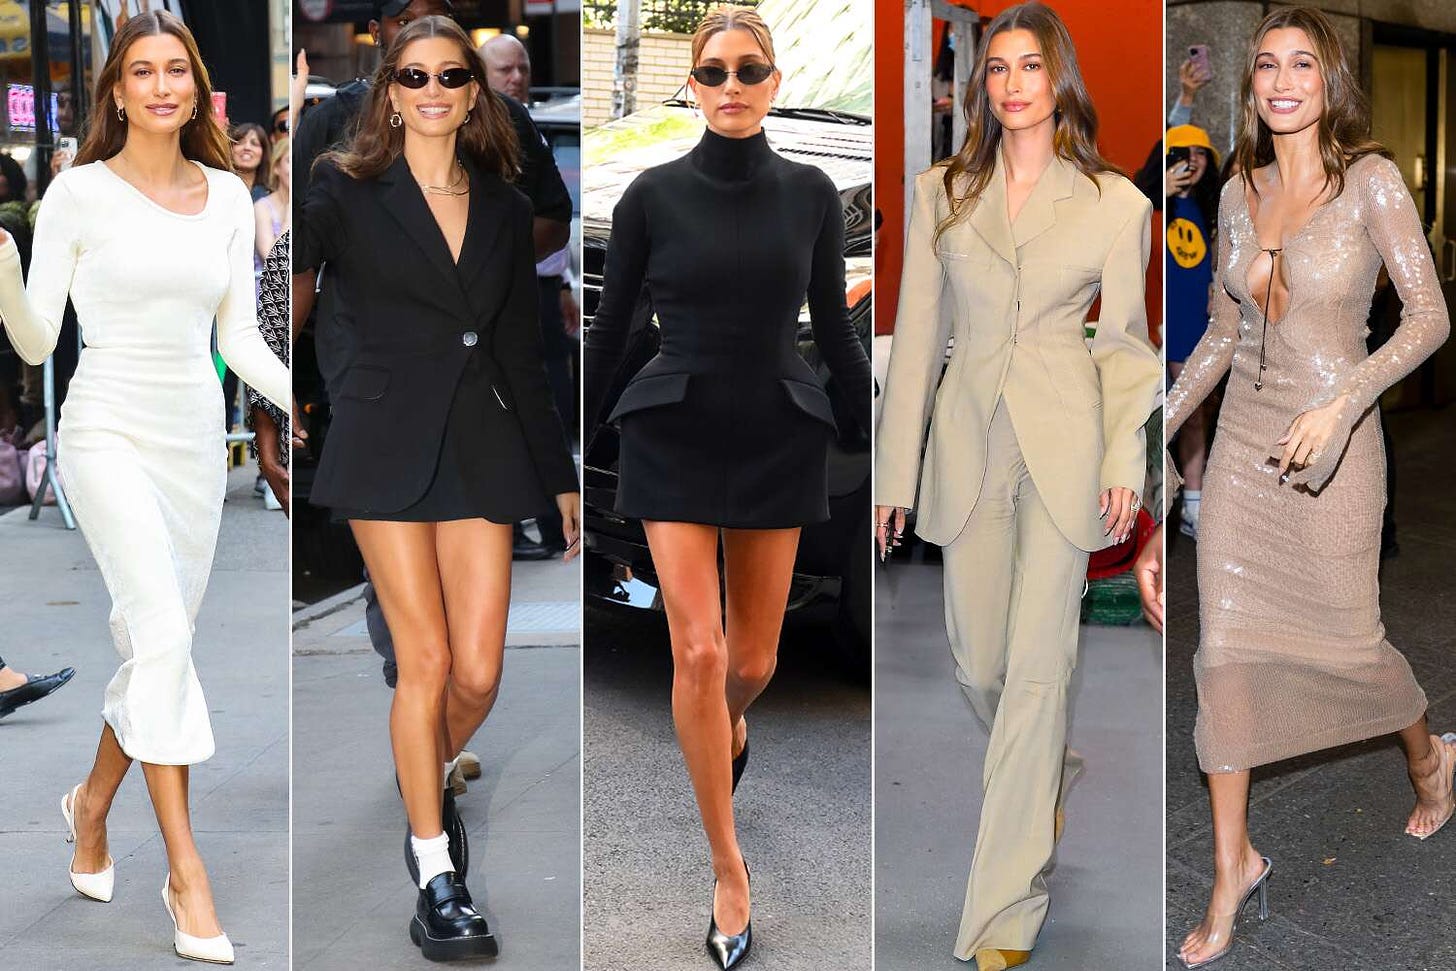 Hailey Bieber Wears 5 Outfits in One Day While Promoting New Skincare Line in N.Y.C.